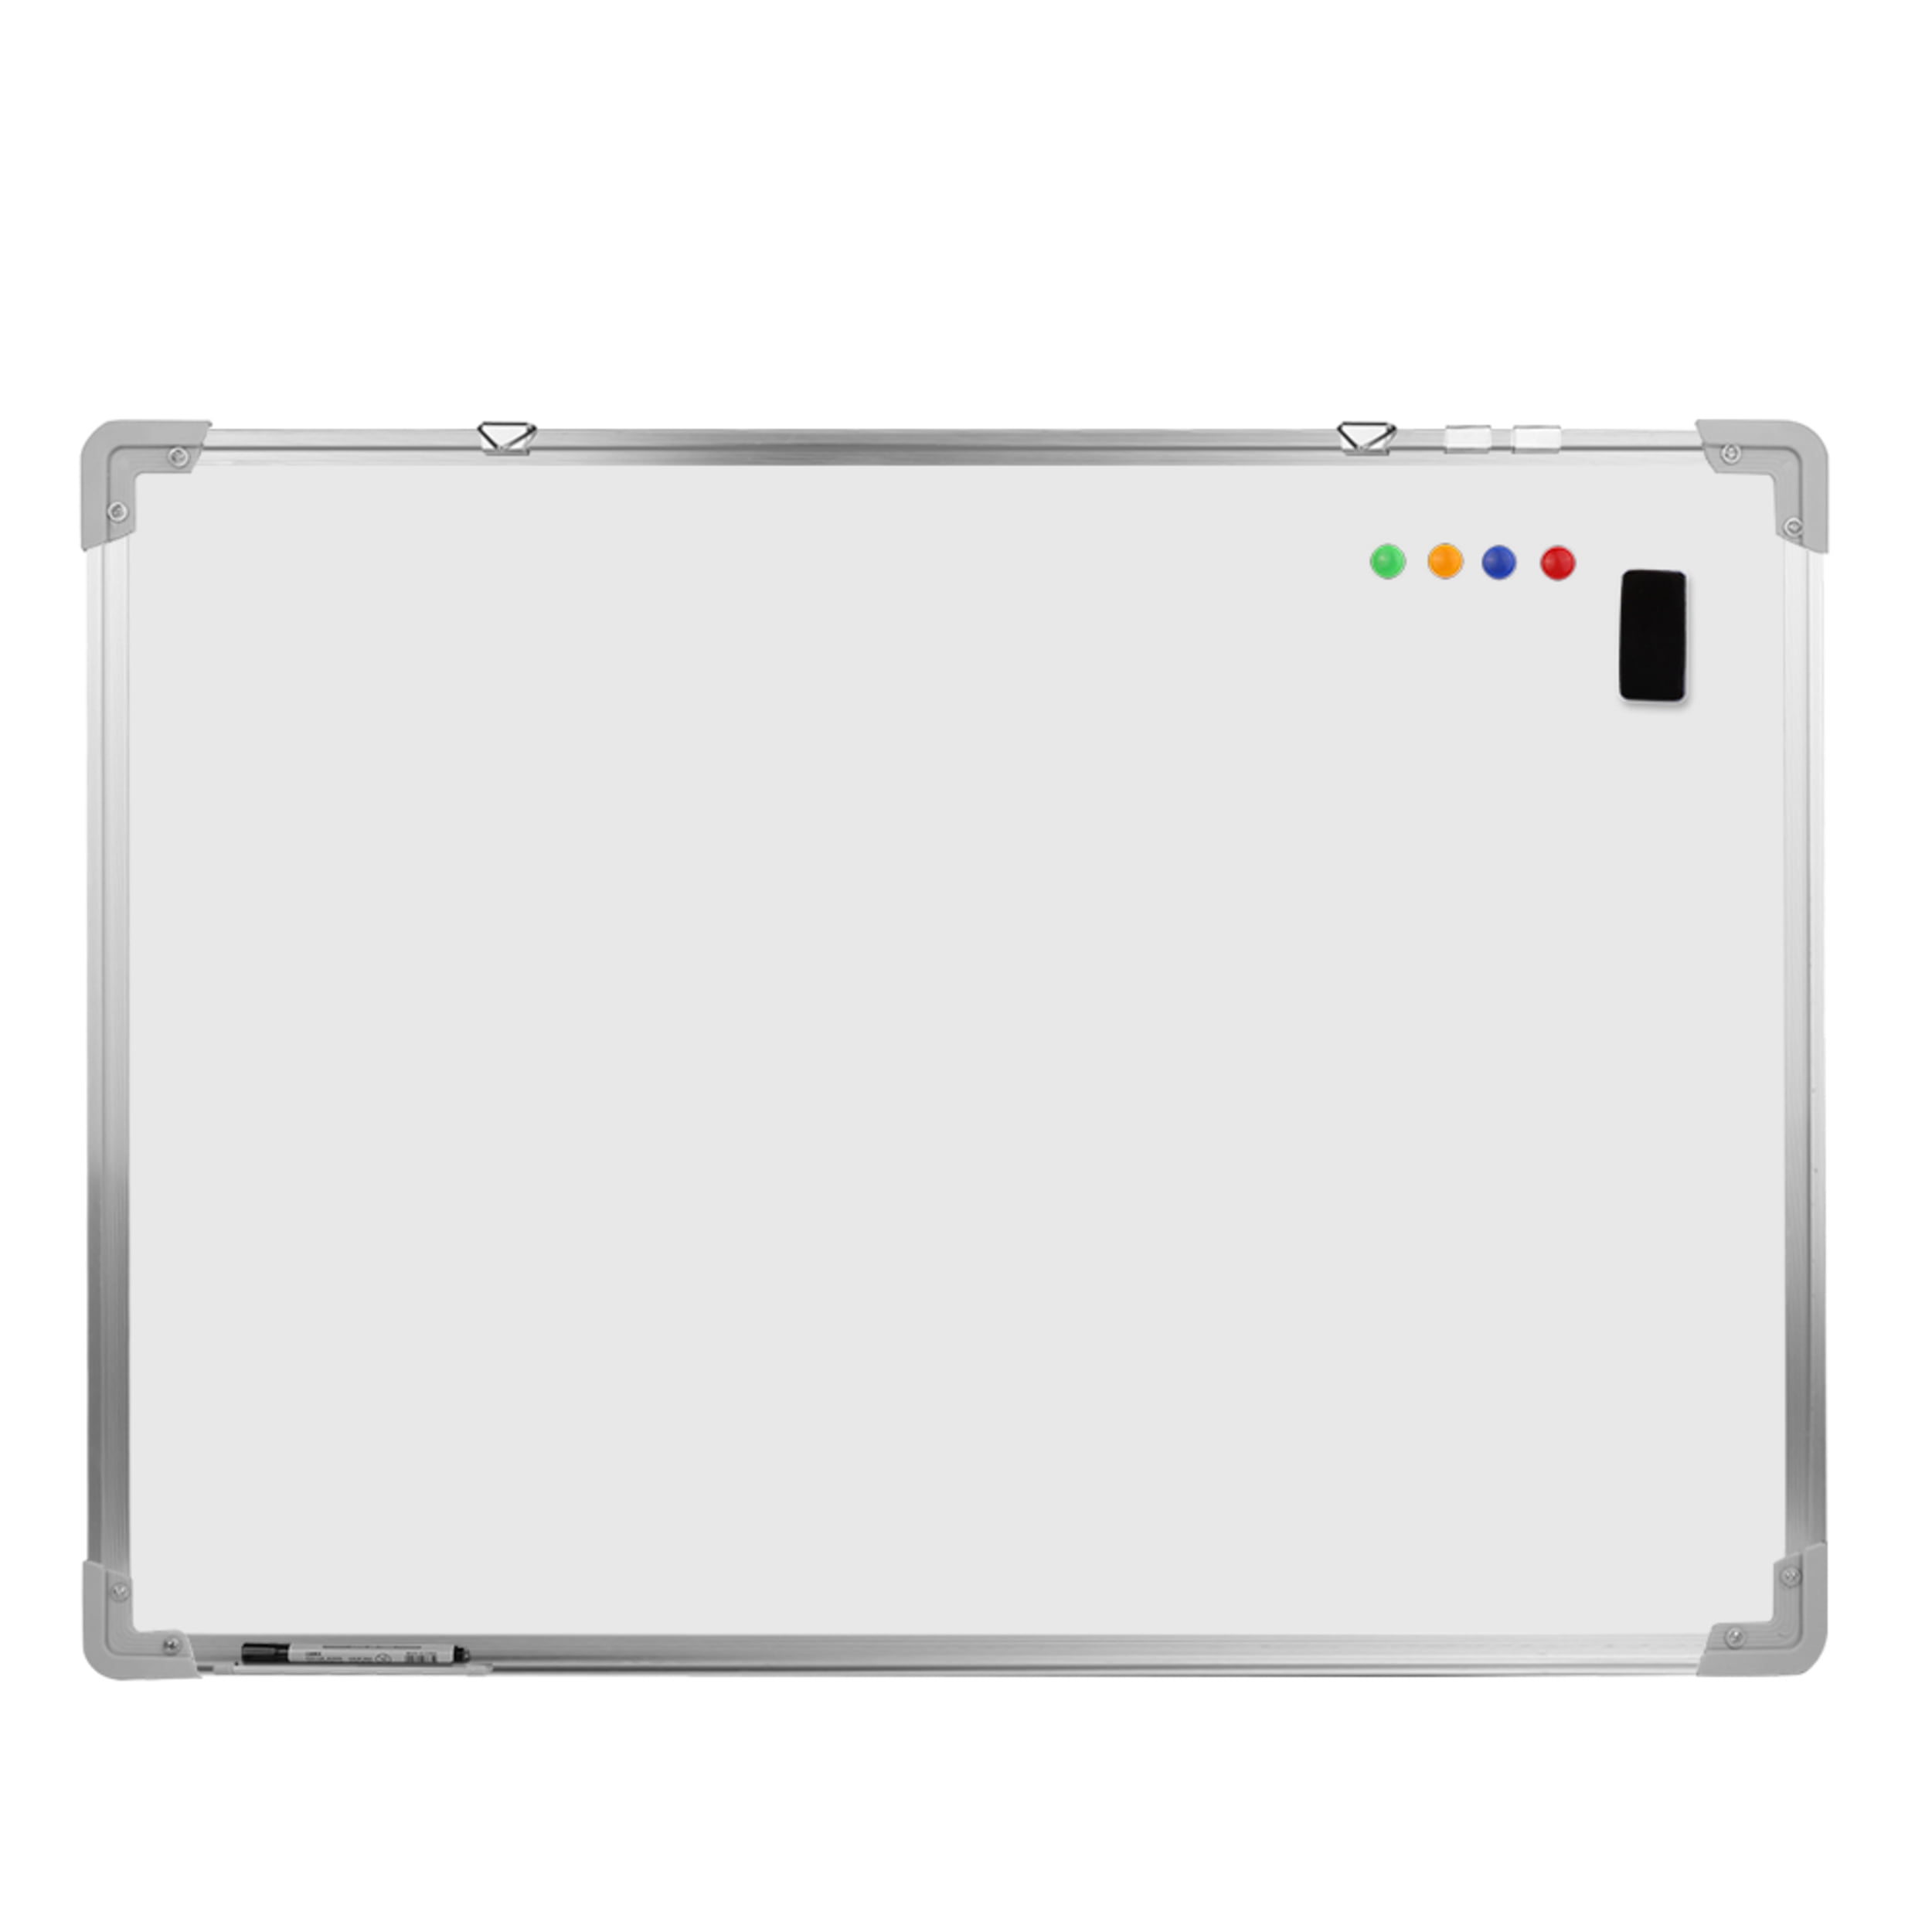 Wall Mounted Magnetic Whiteboard 36 X 48 Inch Aluminum Frame